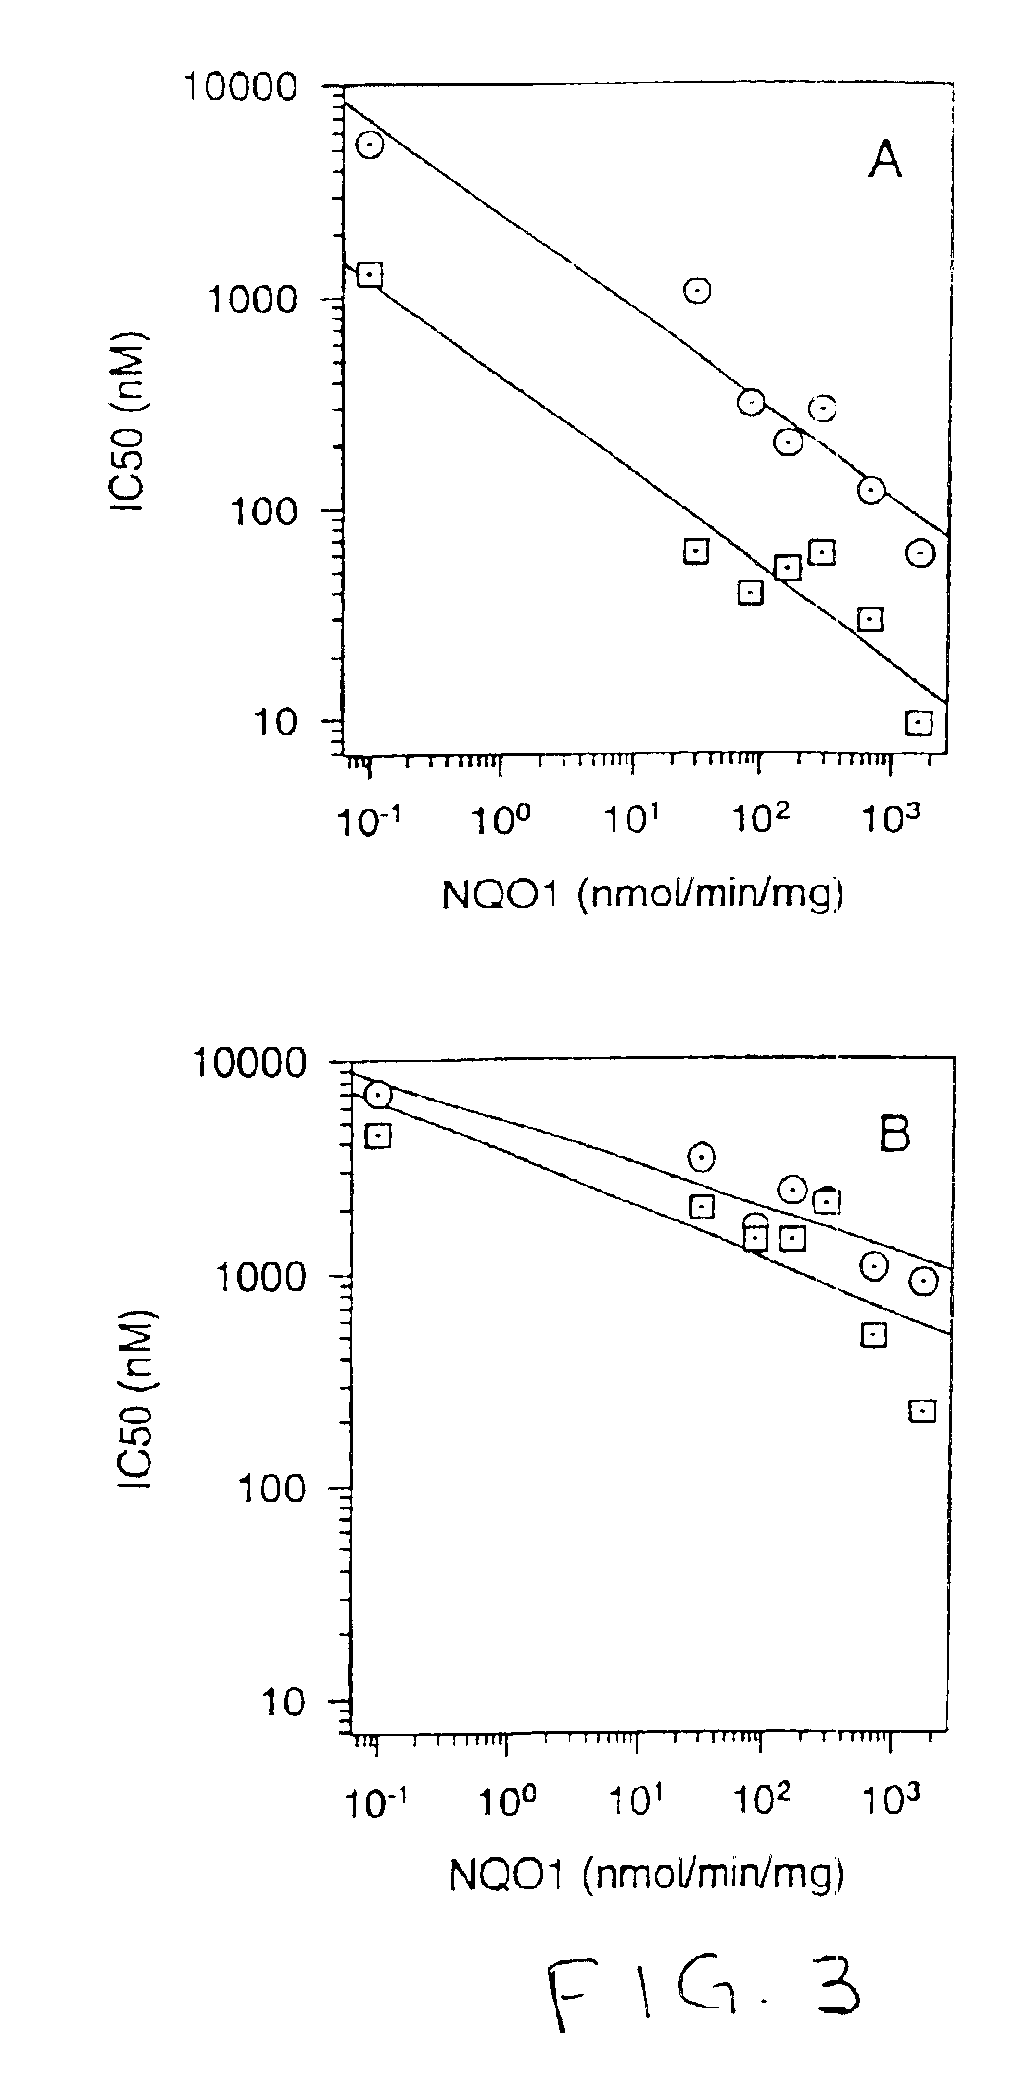 Medical compositions for intravesical treatment of bladder cancer